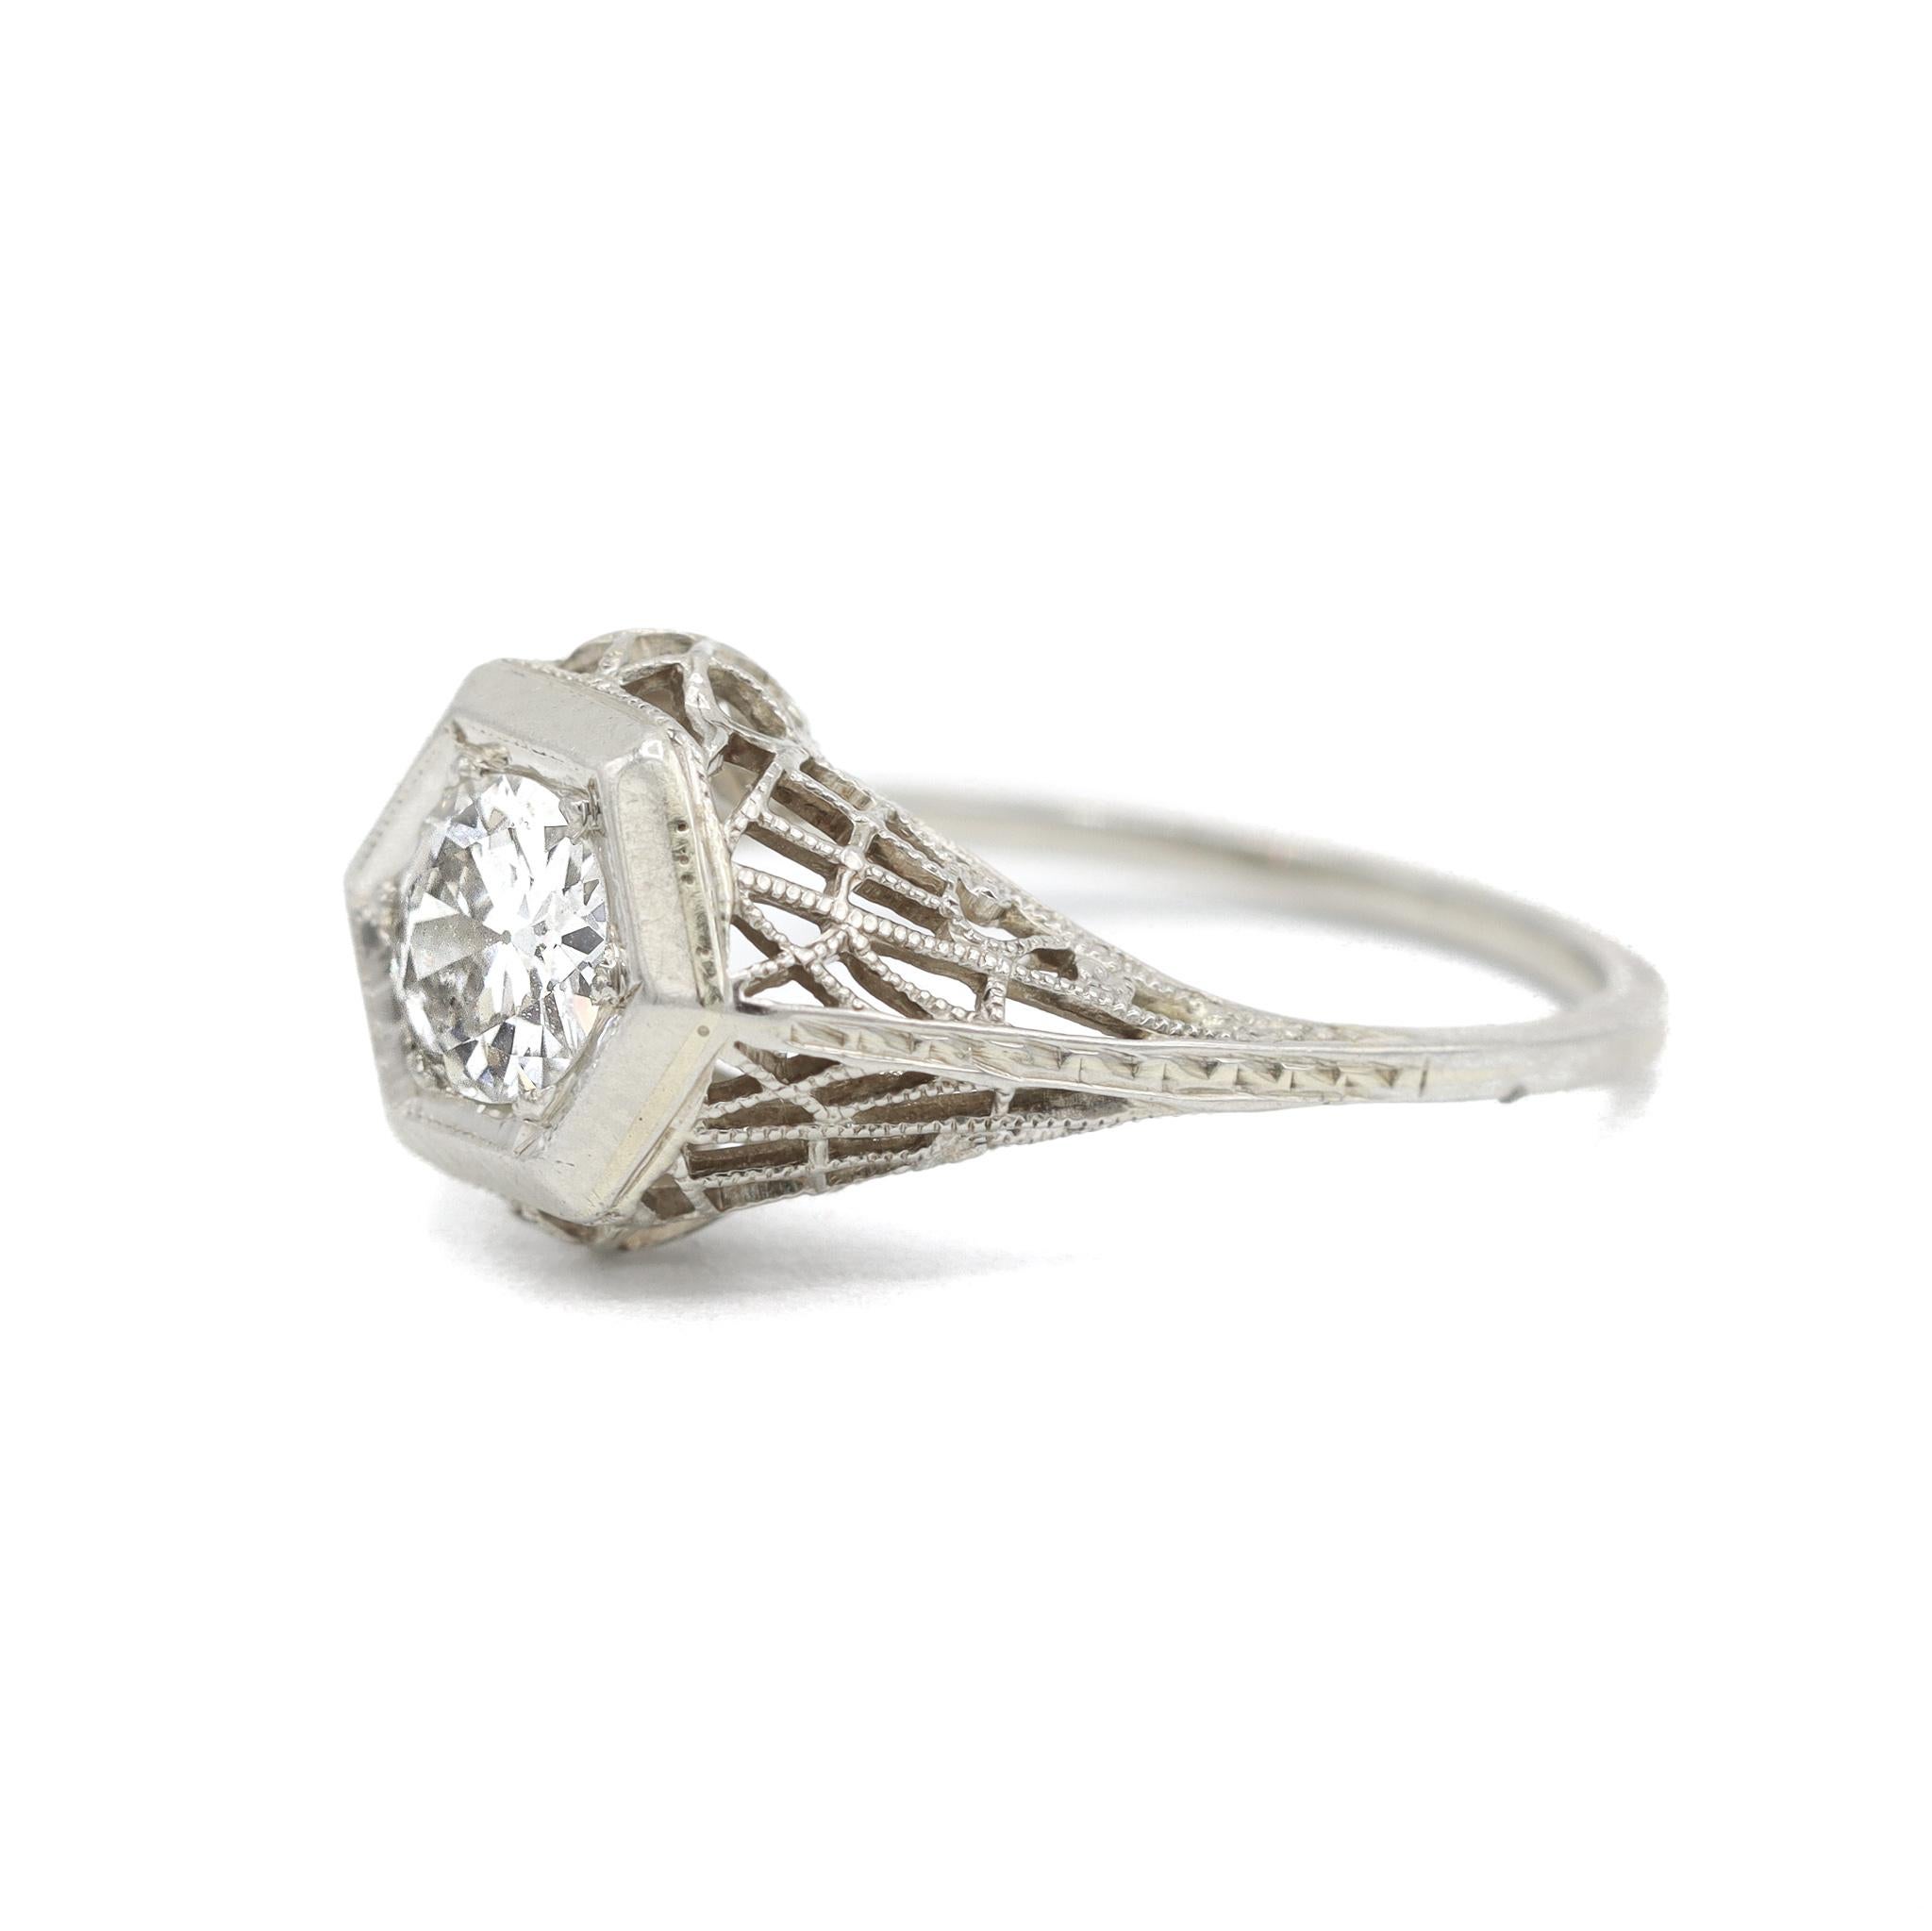 One lady's hand made hand engraved, textured 18K white gold, diamond engagement, vintage, antique, art-deco, solitaire engagement ring with a half round shank. The ring is a size 6.25. The ring weighs a total of 2.60 grams. Engraved with 